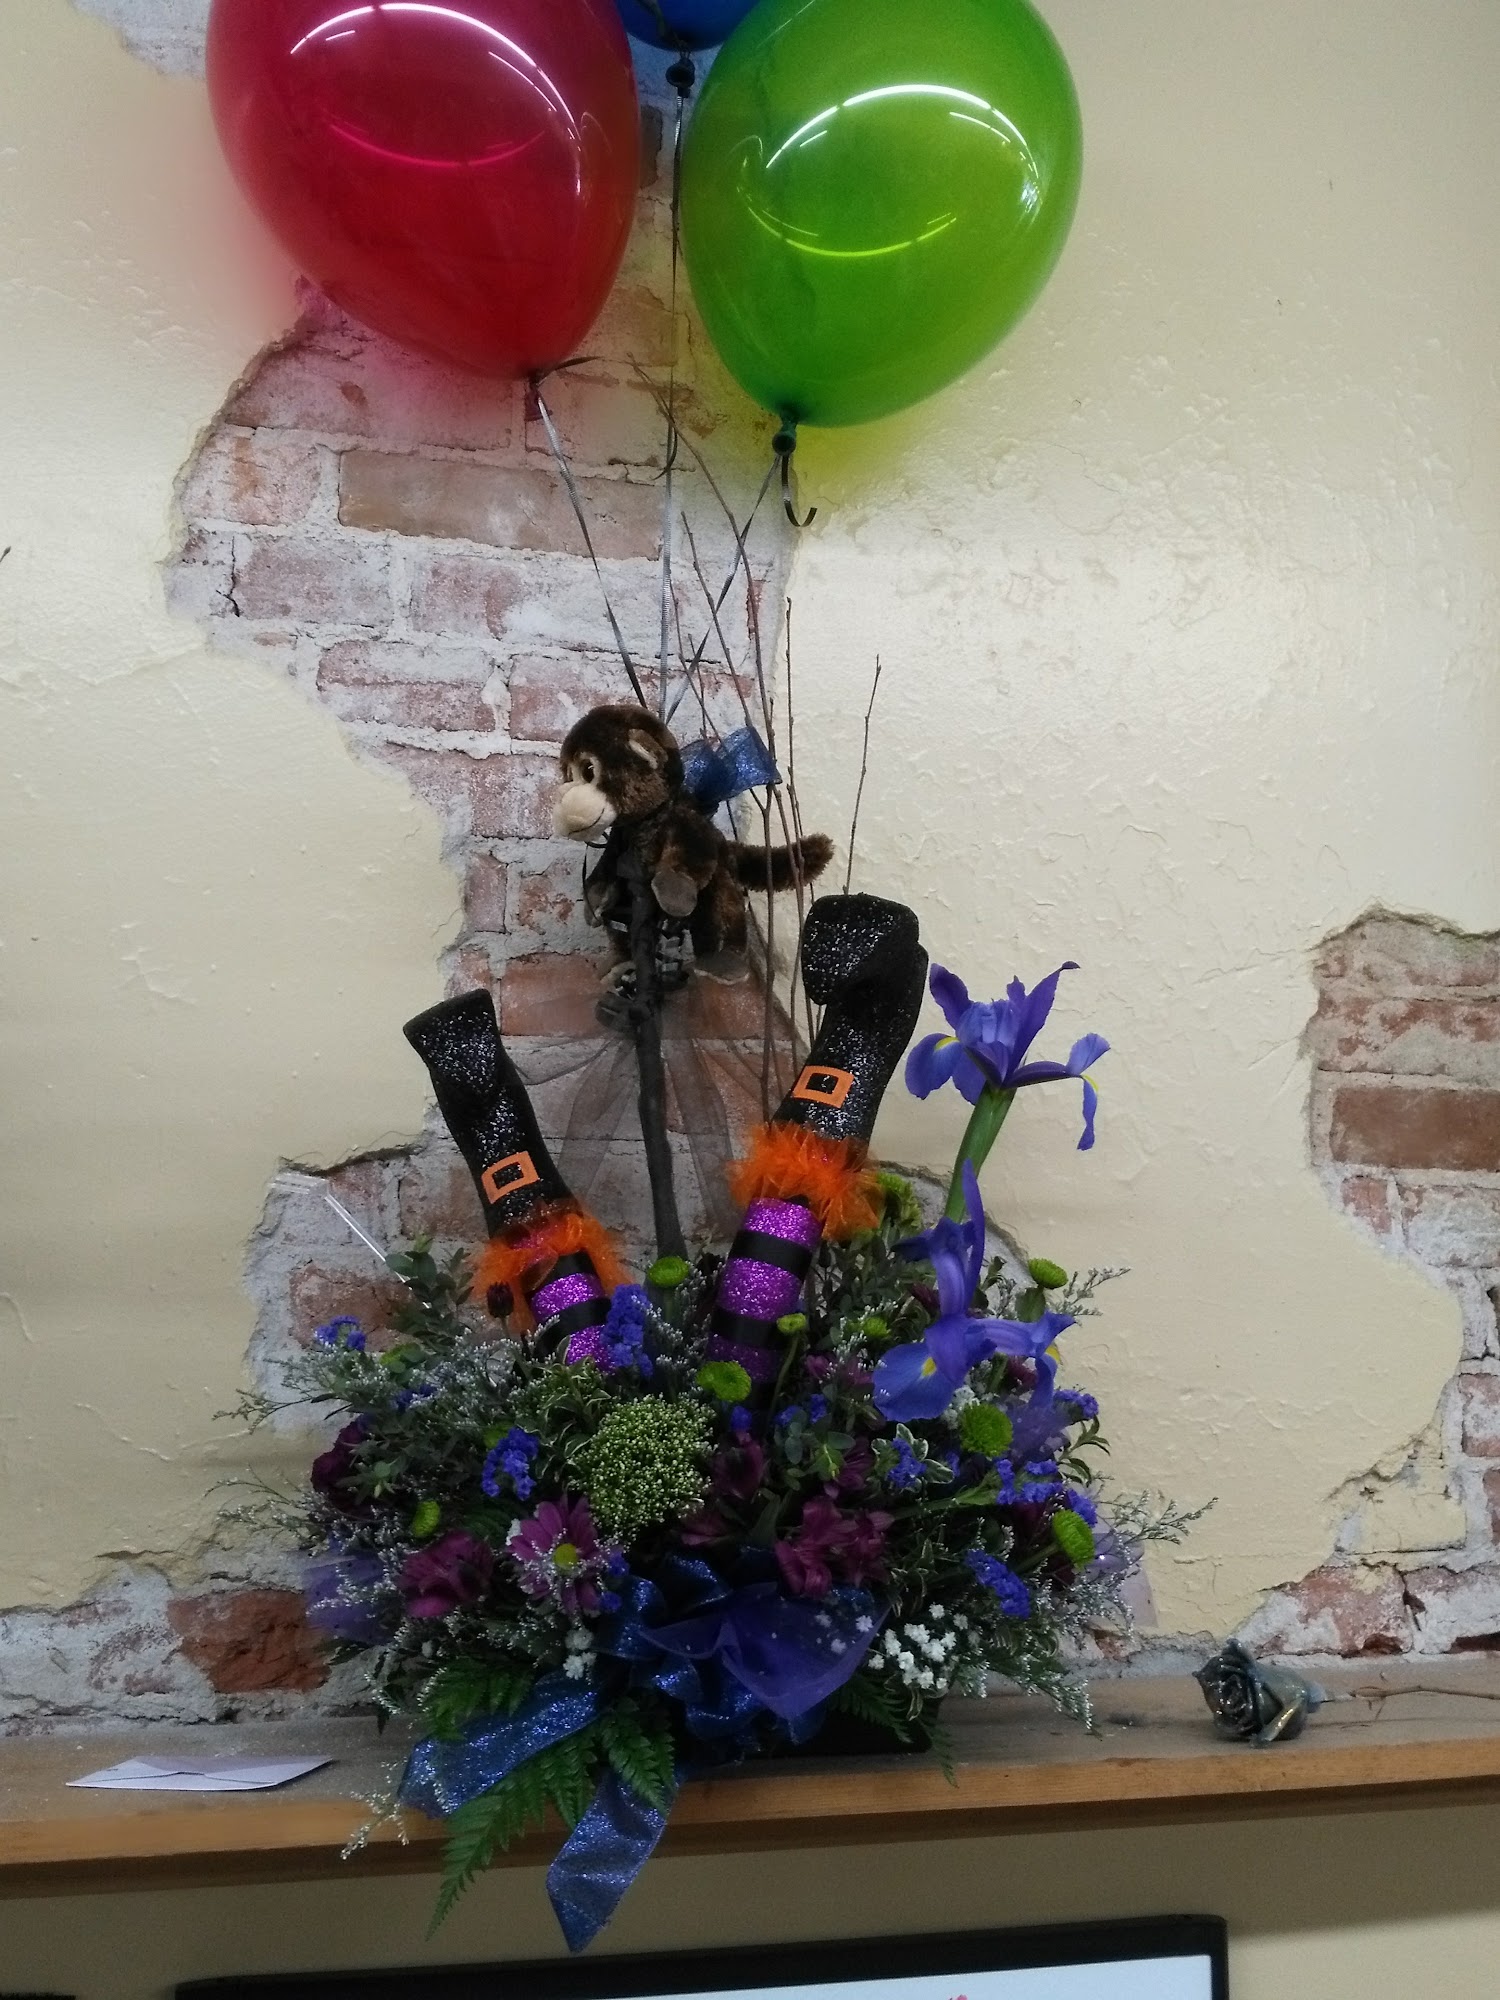 Stella's Flowers and Gifts 307 Main St, Boonville Missouri 65233